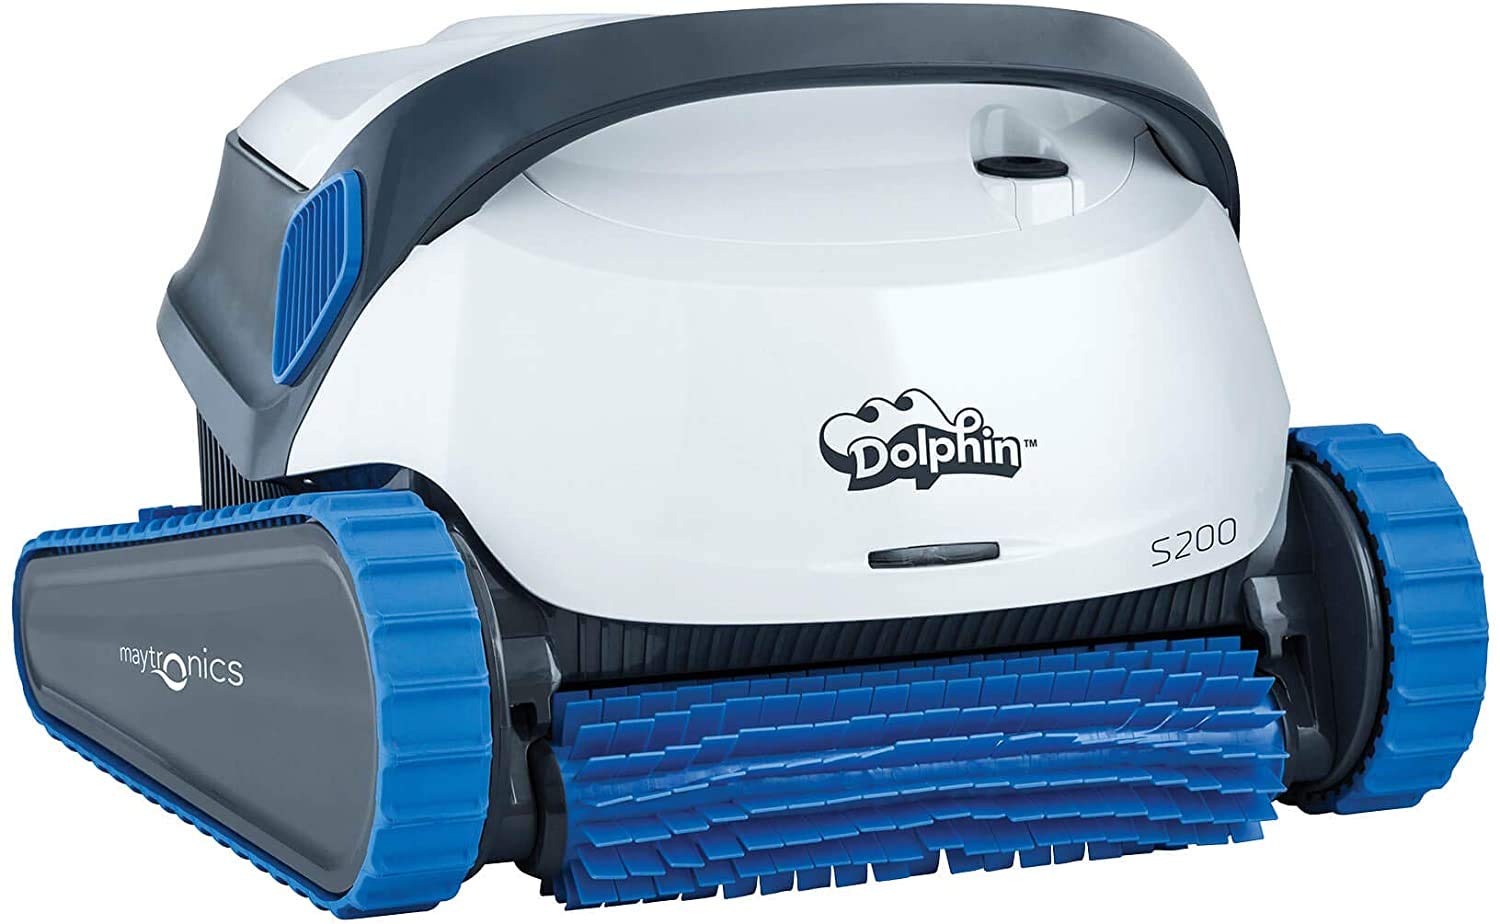 Dolphin S200 Robotic Pool Cleaner Review